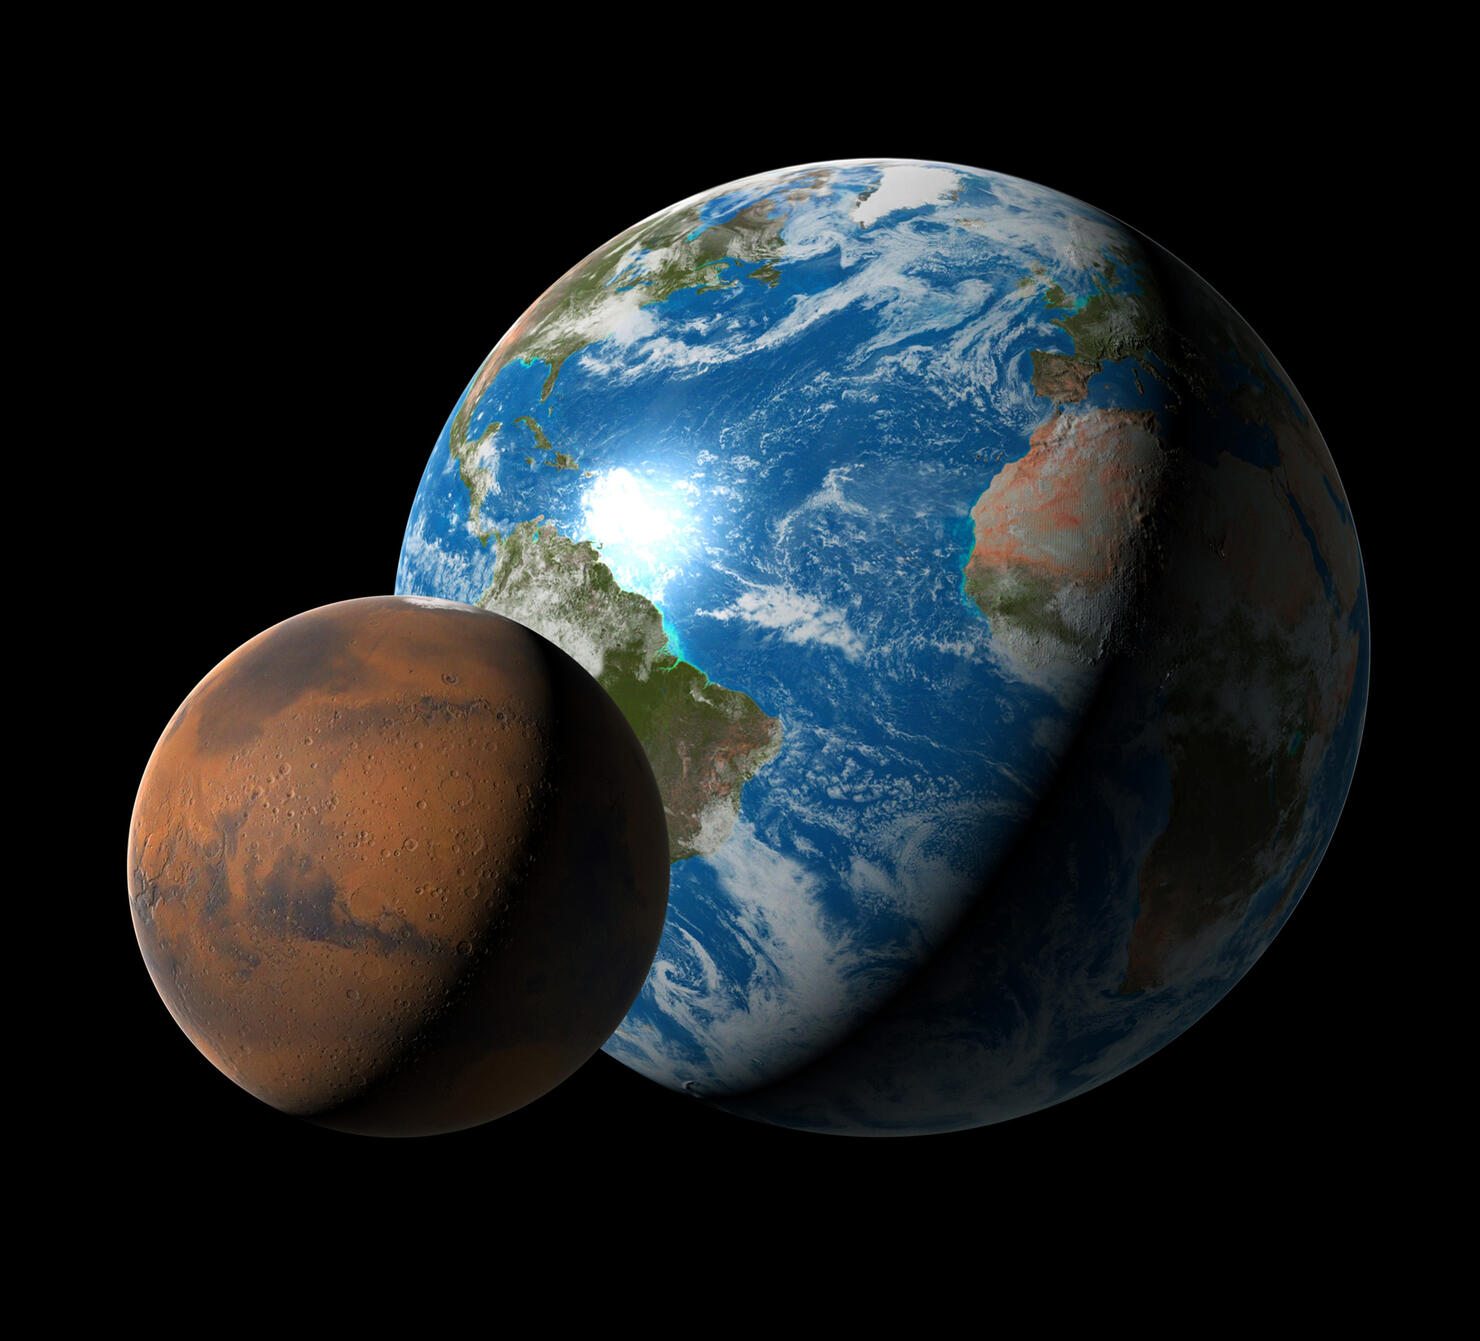 Earth compared to Mars, illustration